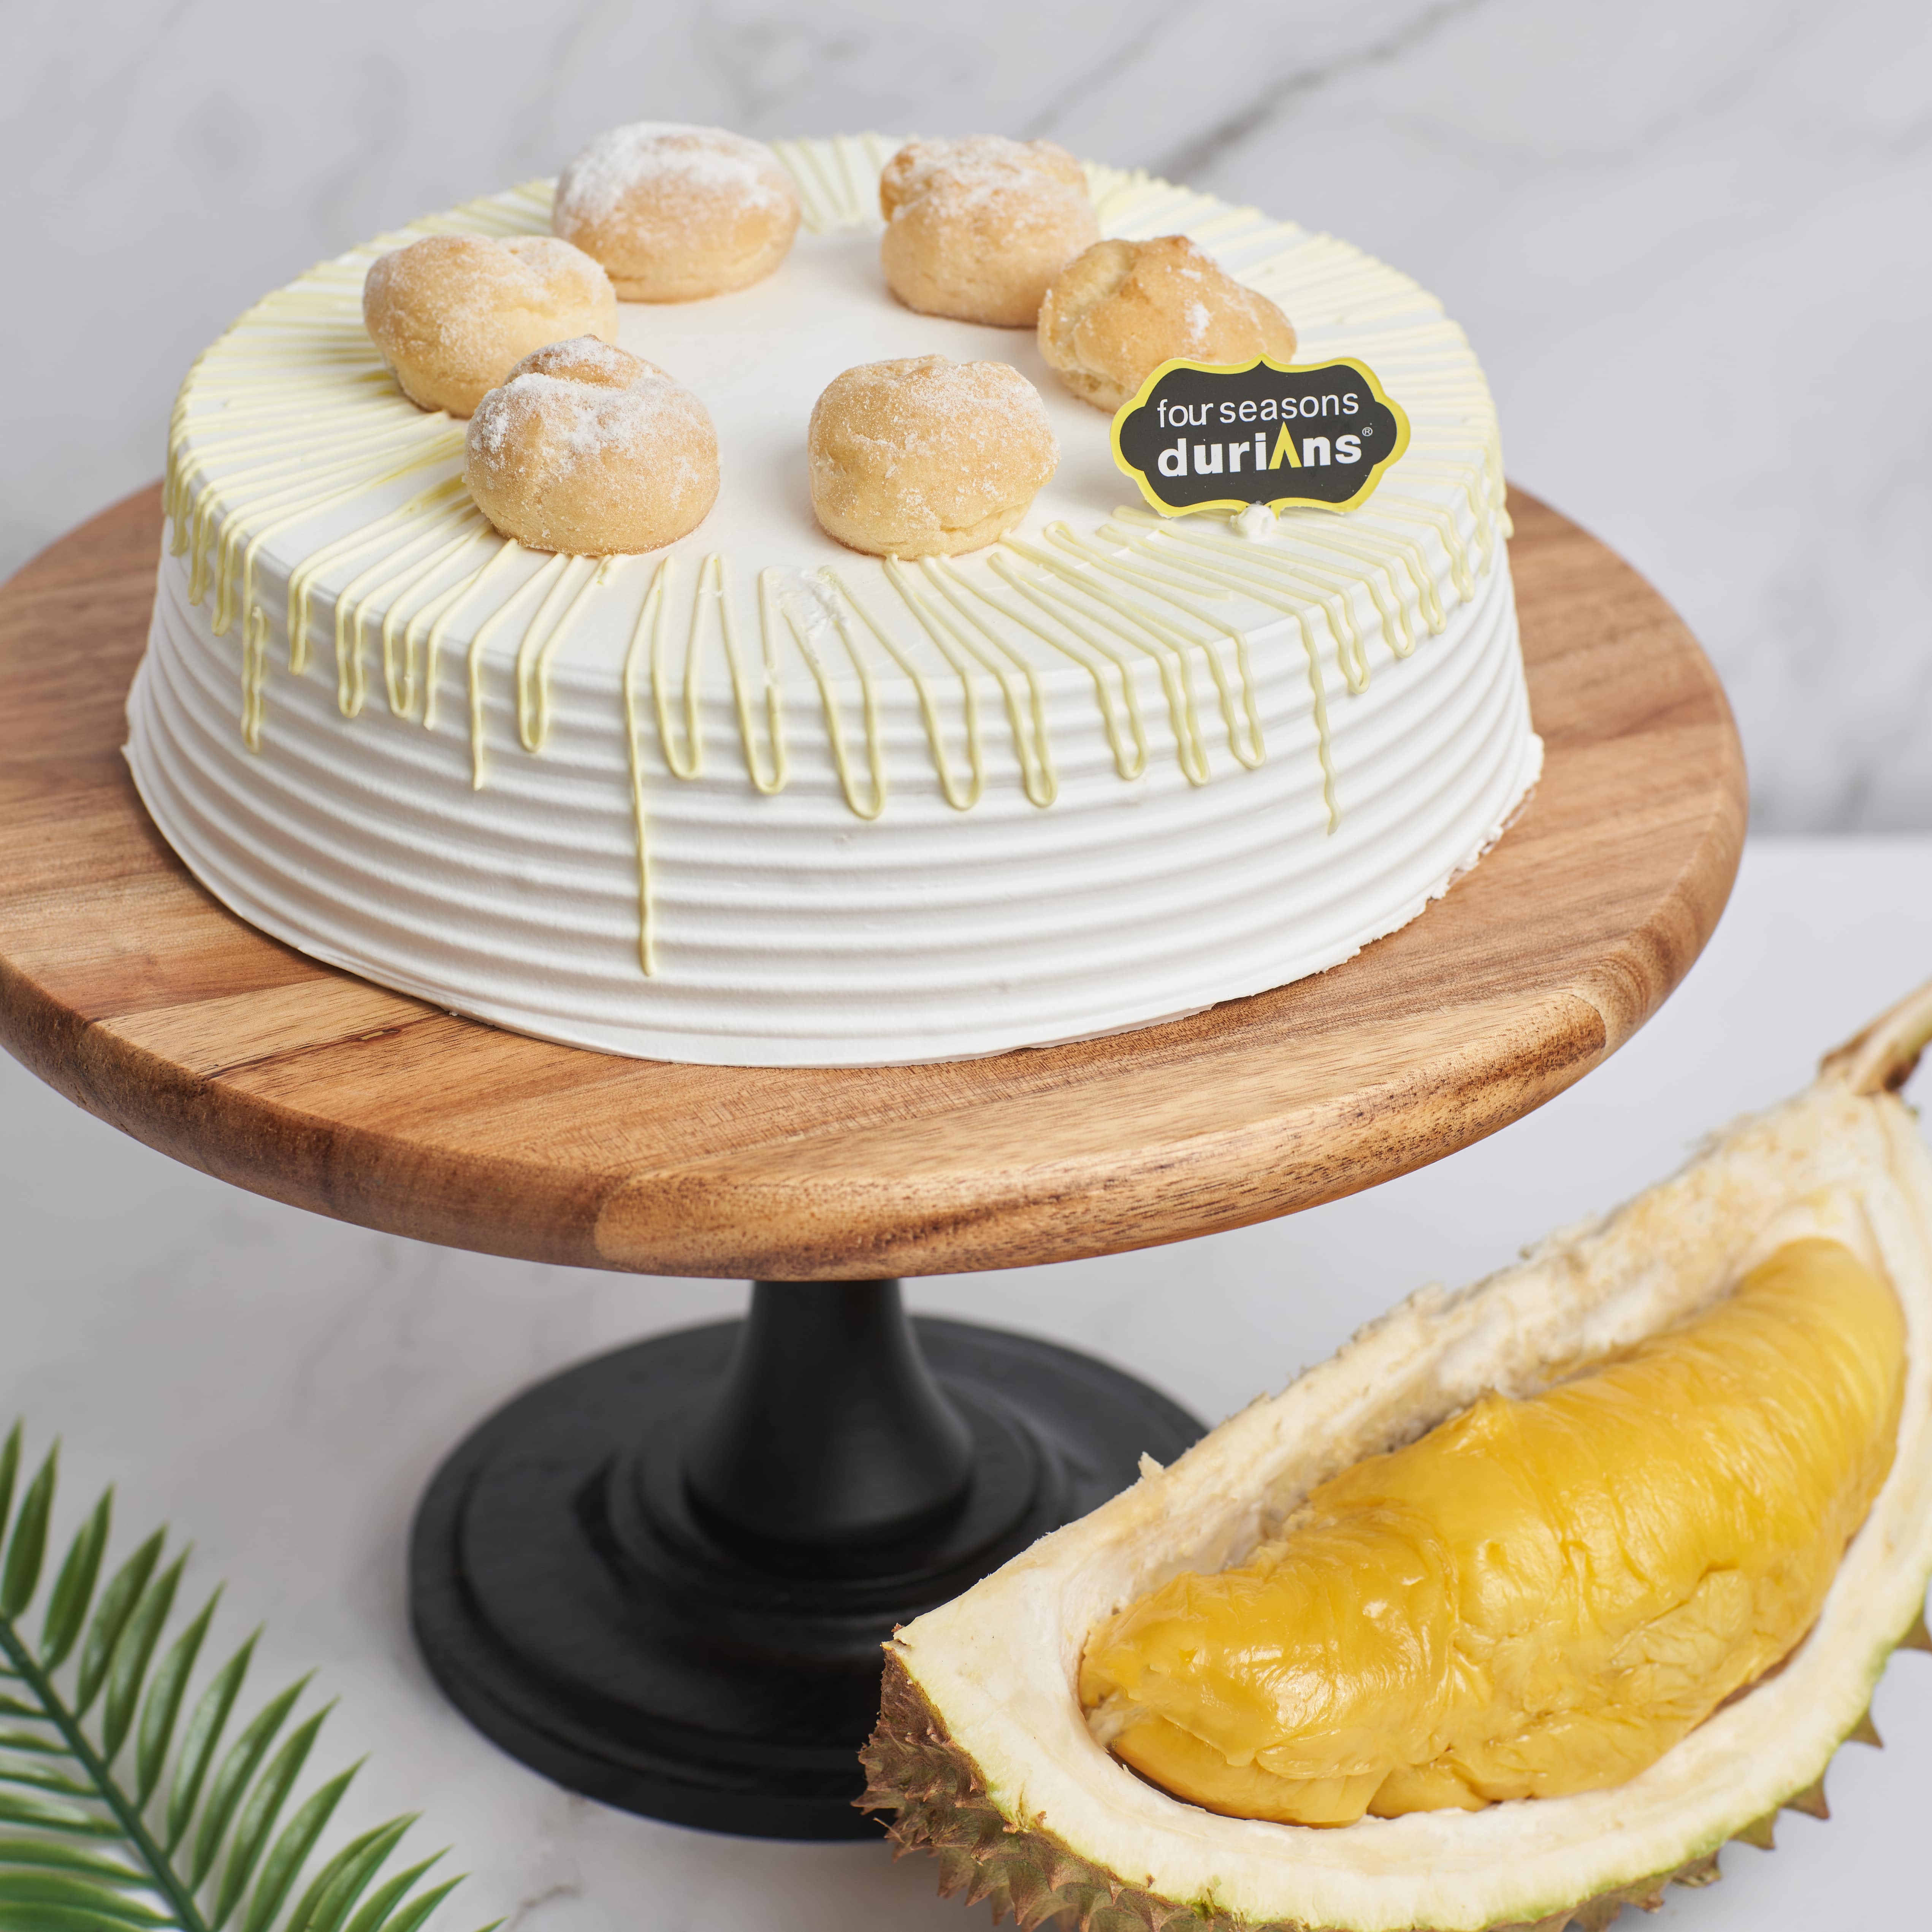 NDP Classic Cake Promo Code Terms & Conditions